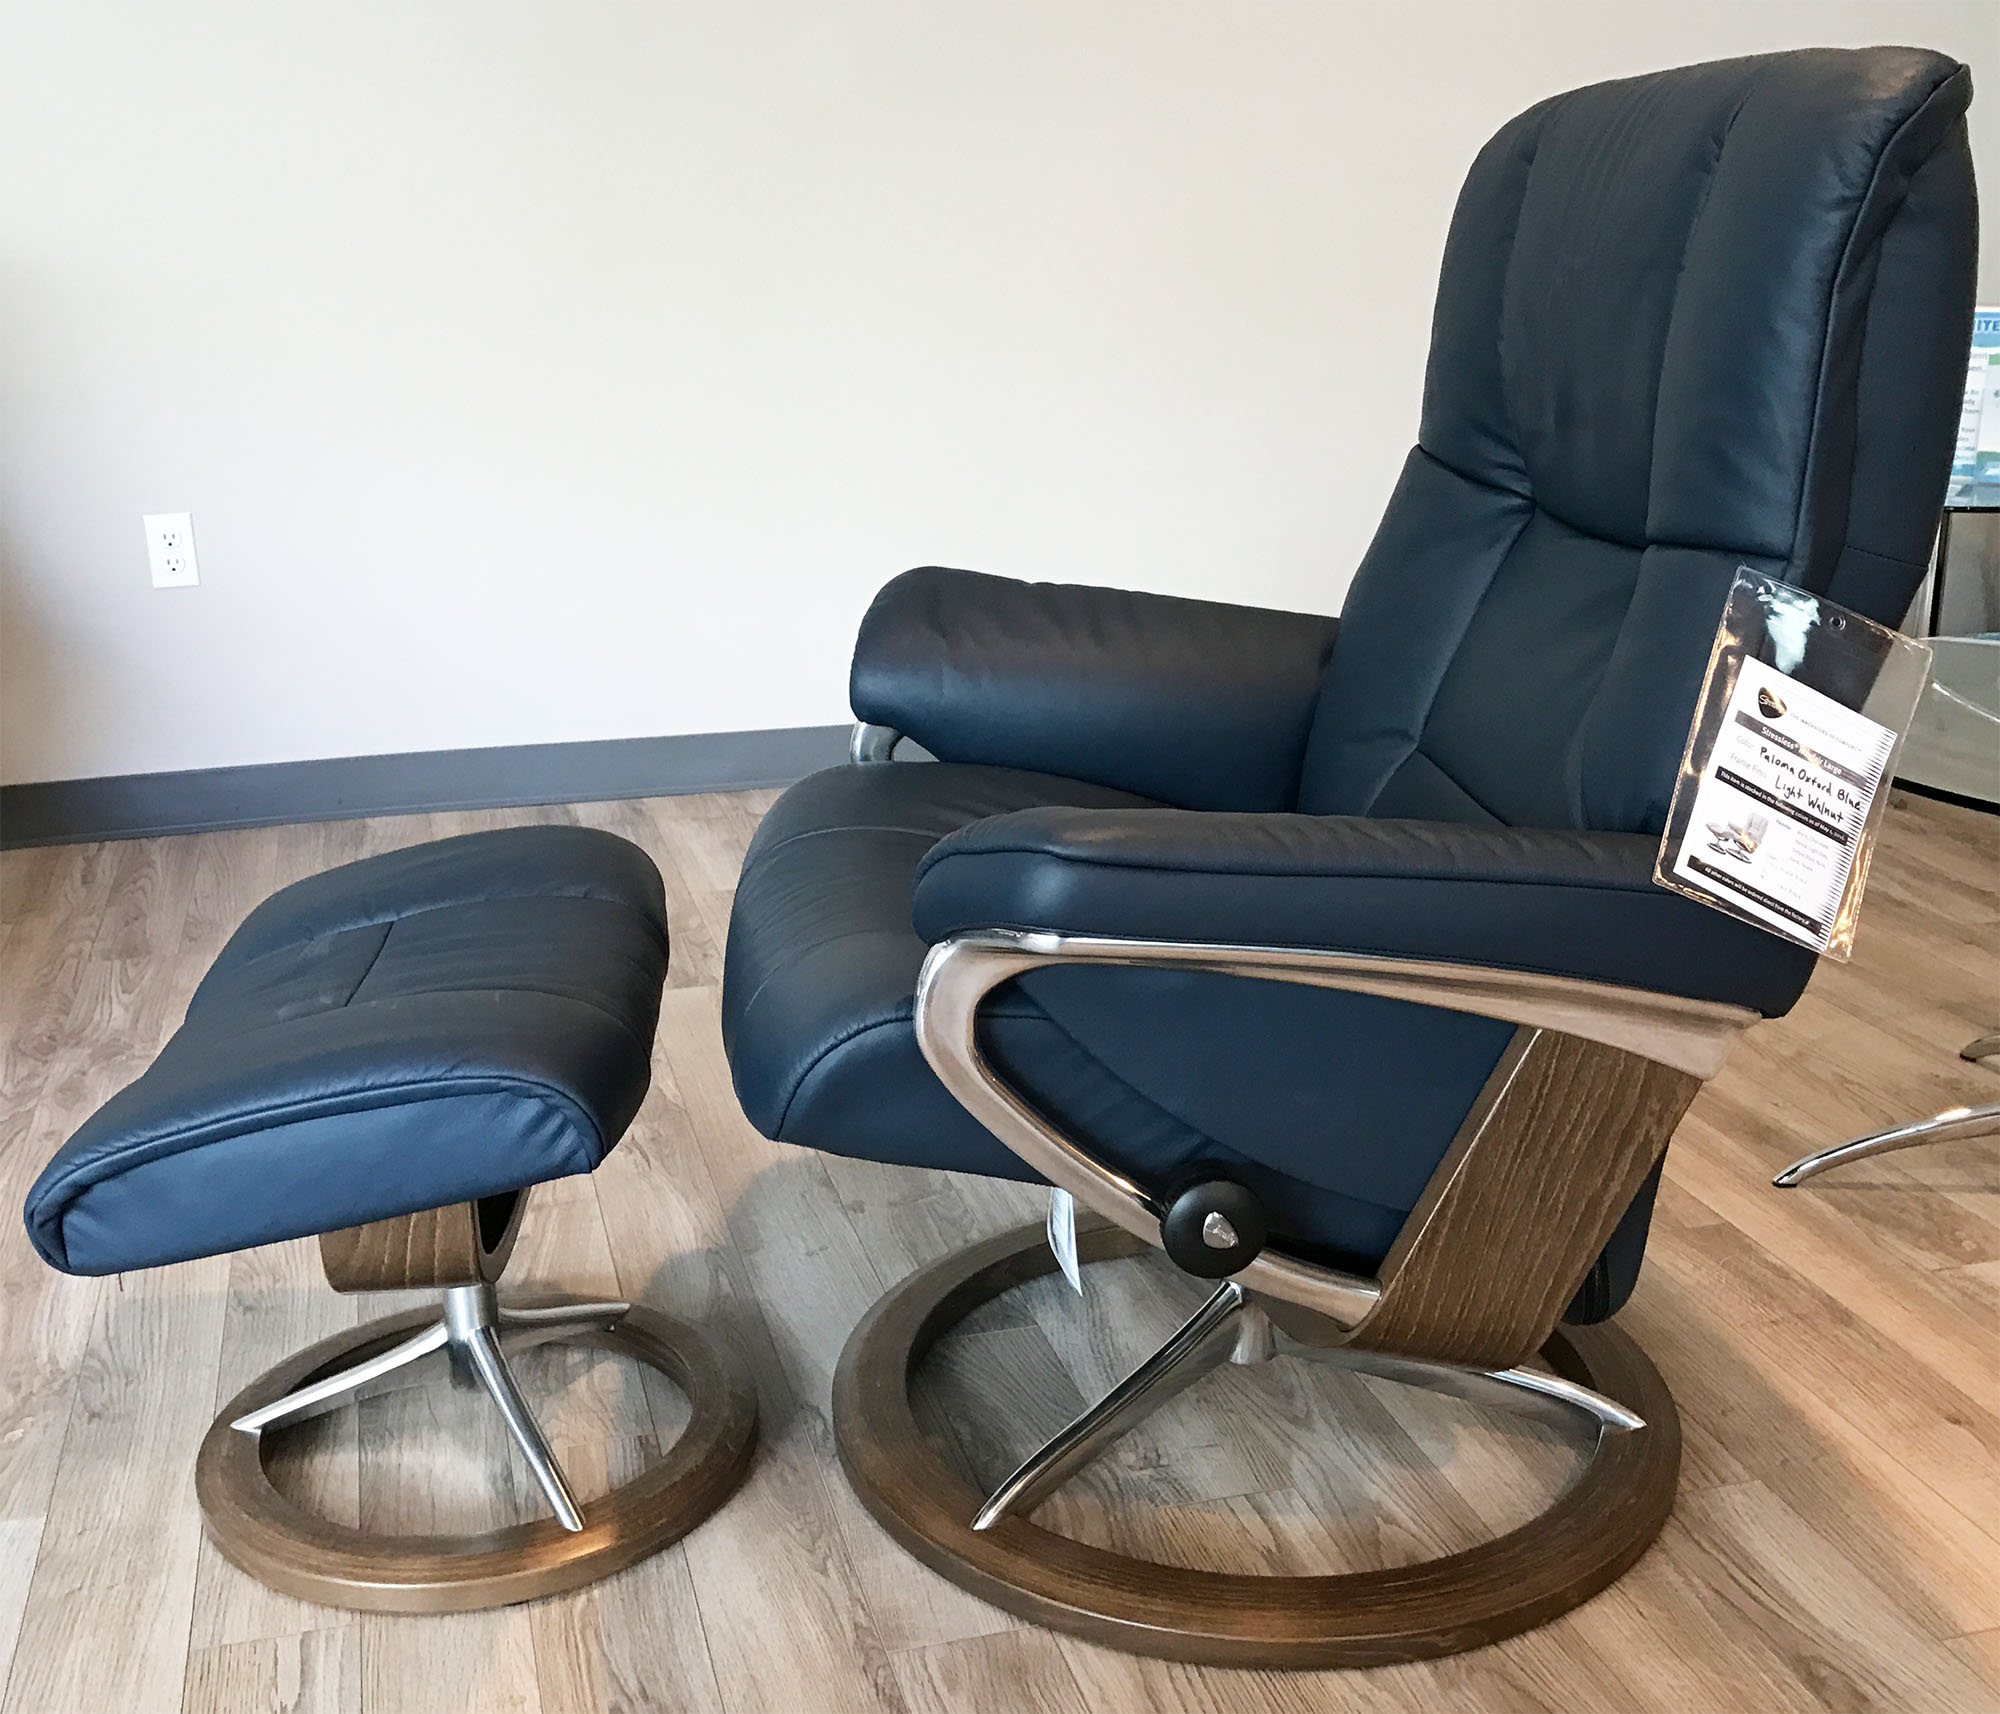 Stressless Mayfair Signature Recliner by Walnut Ekornes Leather Ottoman Chair Paloma Oxford Wood and Blue